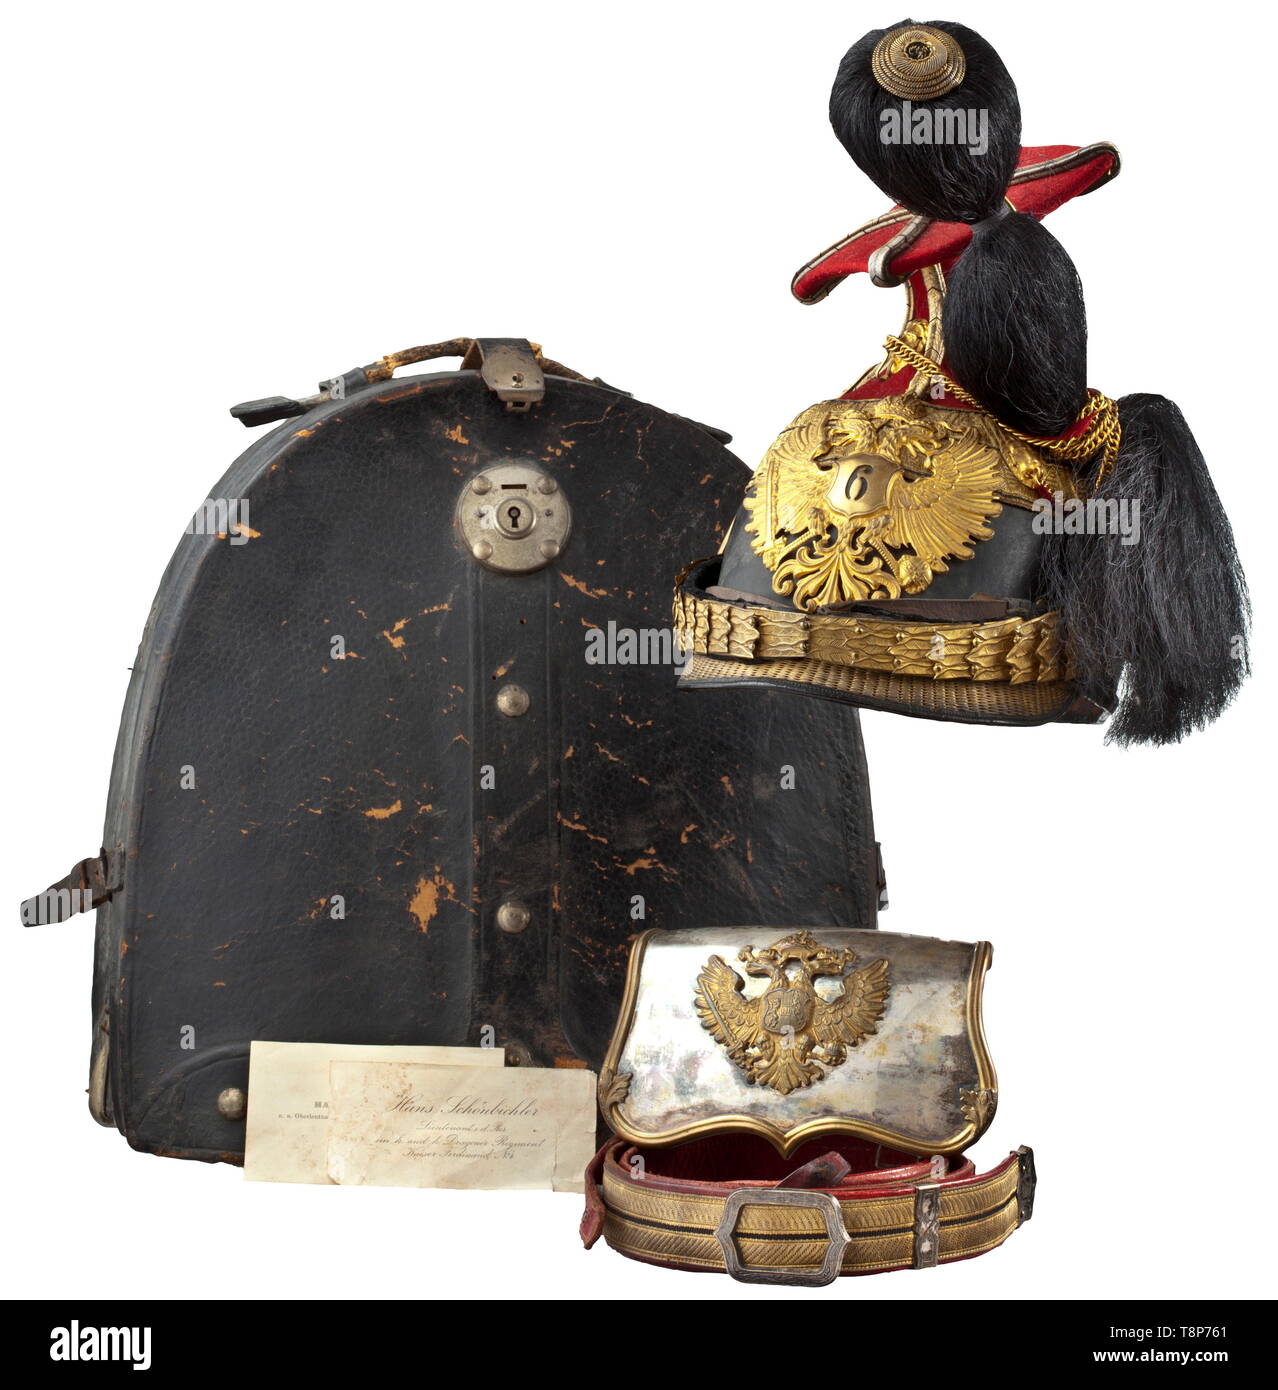 A czapka and a cartridge box of cavalry captain Hans Schönbichler from the Austro-Hungarian Landwehr-Uhlan Regiment No. 6 Czapka with black leather skull, madder red cloth cover, square silver cord. Gilt mounts, leather lined chinscales of interlinked rings, emblem punched with the regiment number '6', black buffalo hair plume, gilt chains on lion head bosses, gold cord indicating the rank with one central and two lateral stripes, white silk lining, inscribed with the owner's name in old handwriting, brown sweatband. Original czapka cover of ligh, Additional-Rights-Clearance-Info-Not-Available Stock Photo